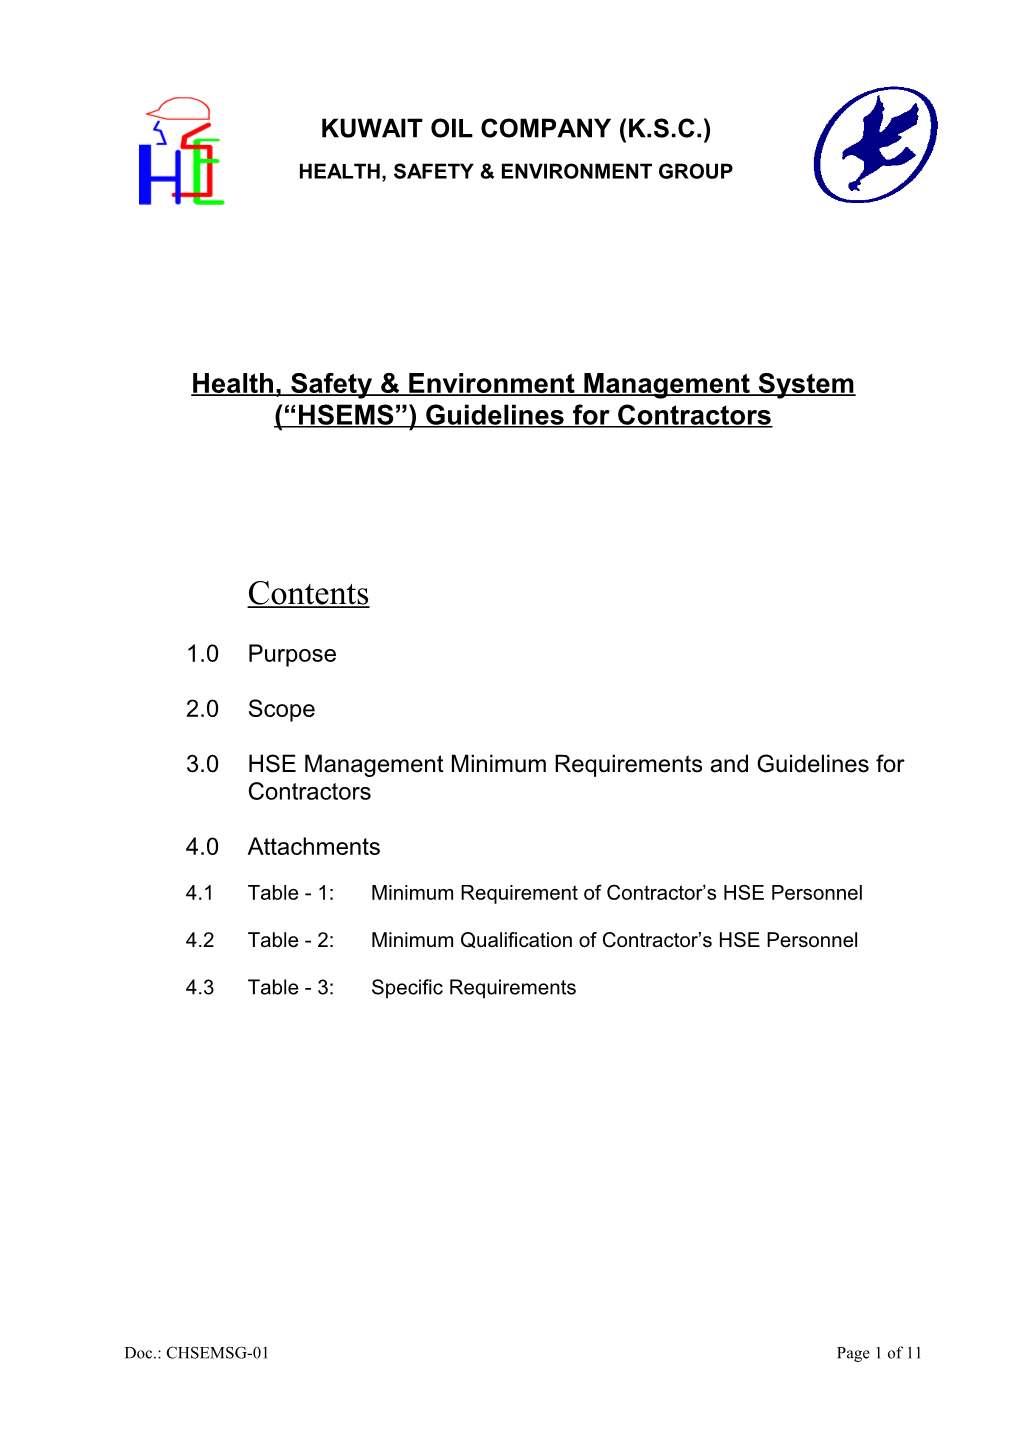 Health, Safety & Environment Management System ( HSEMS ) Guidelines for Contractors